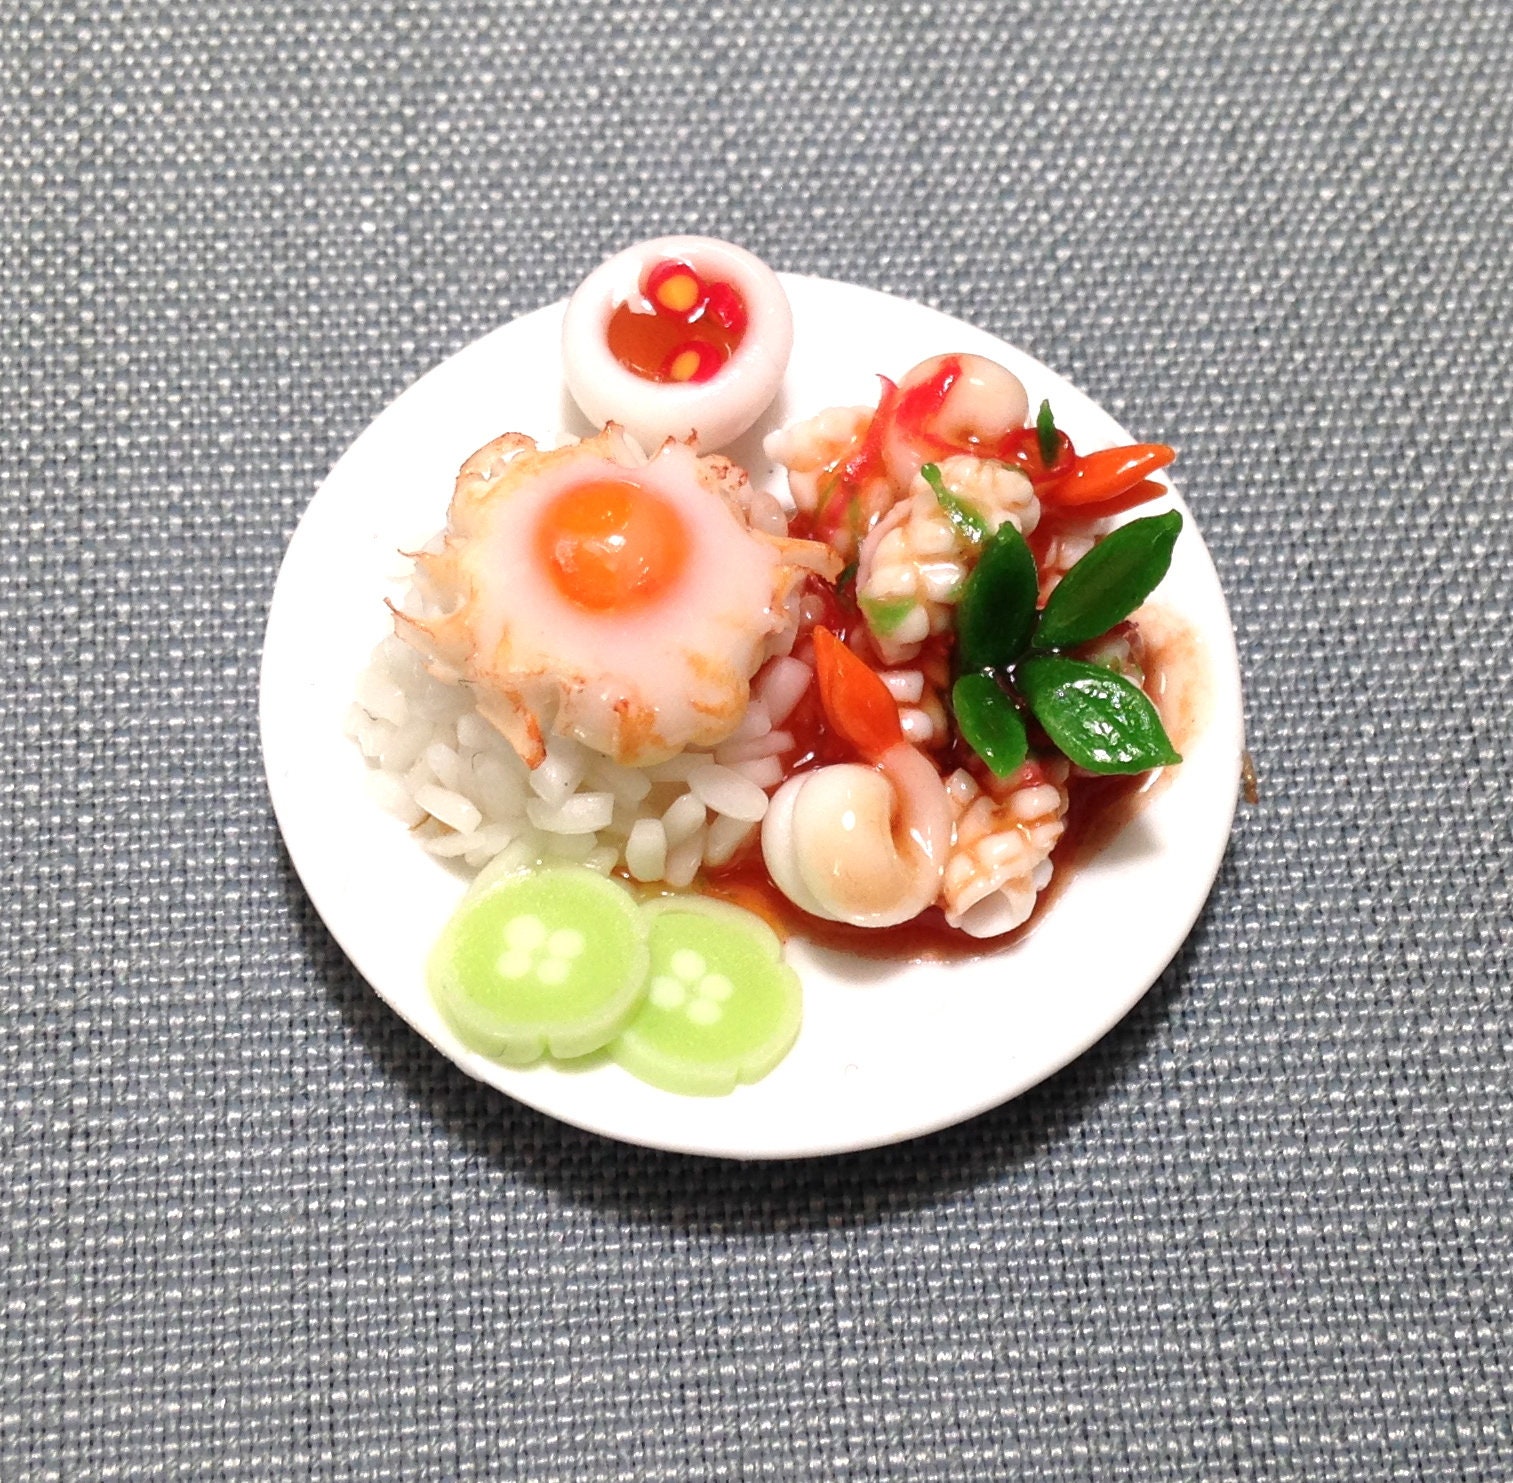 Shrimps Seafood Rice Miniature Dollhouse Clay Polymer Asia Food Supply Cute Small Dish Plate Bowl Sauce Ceramic Jewelry Supplies Decor 1/12